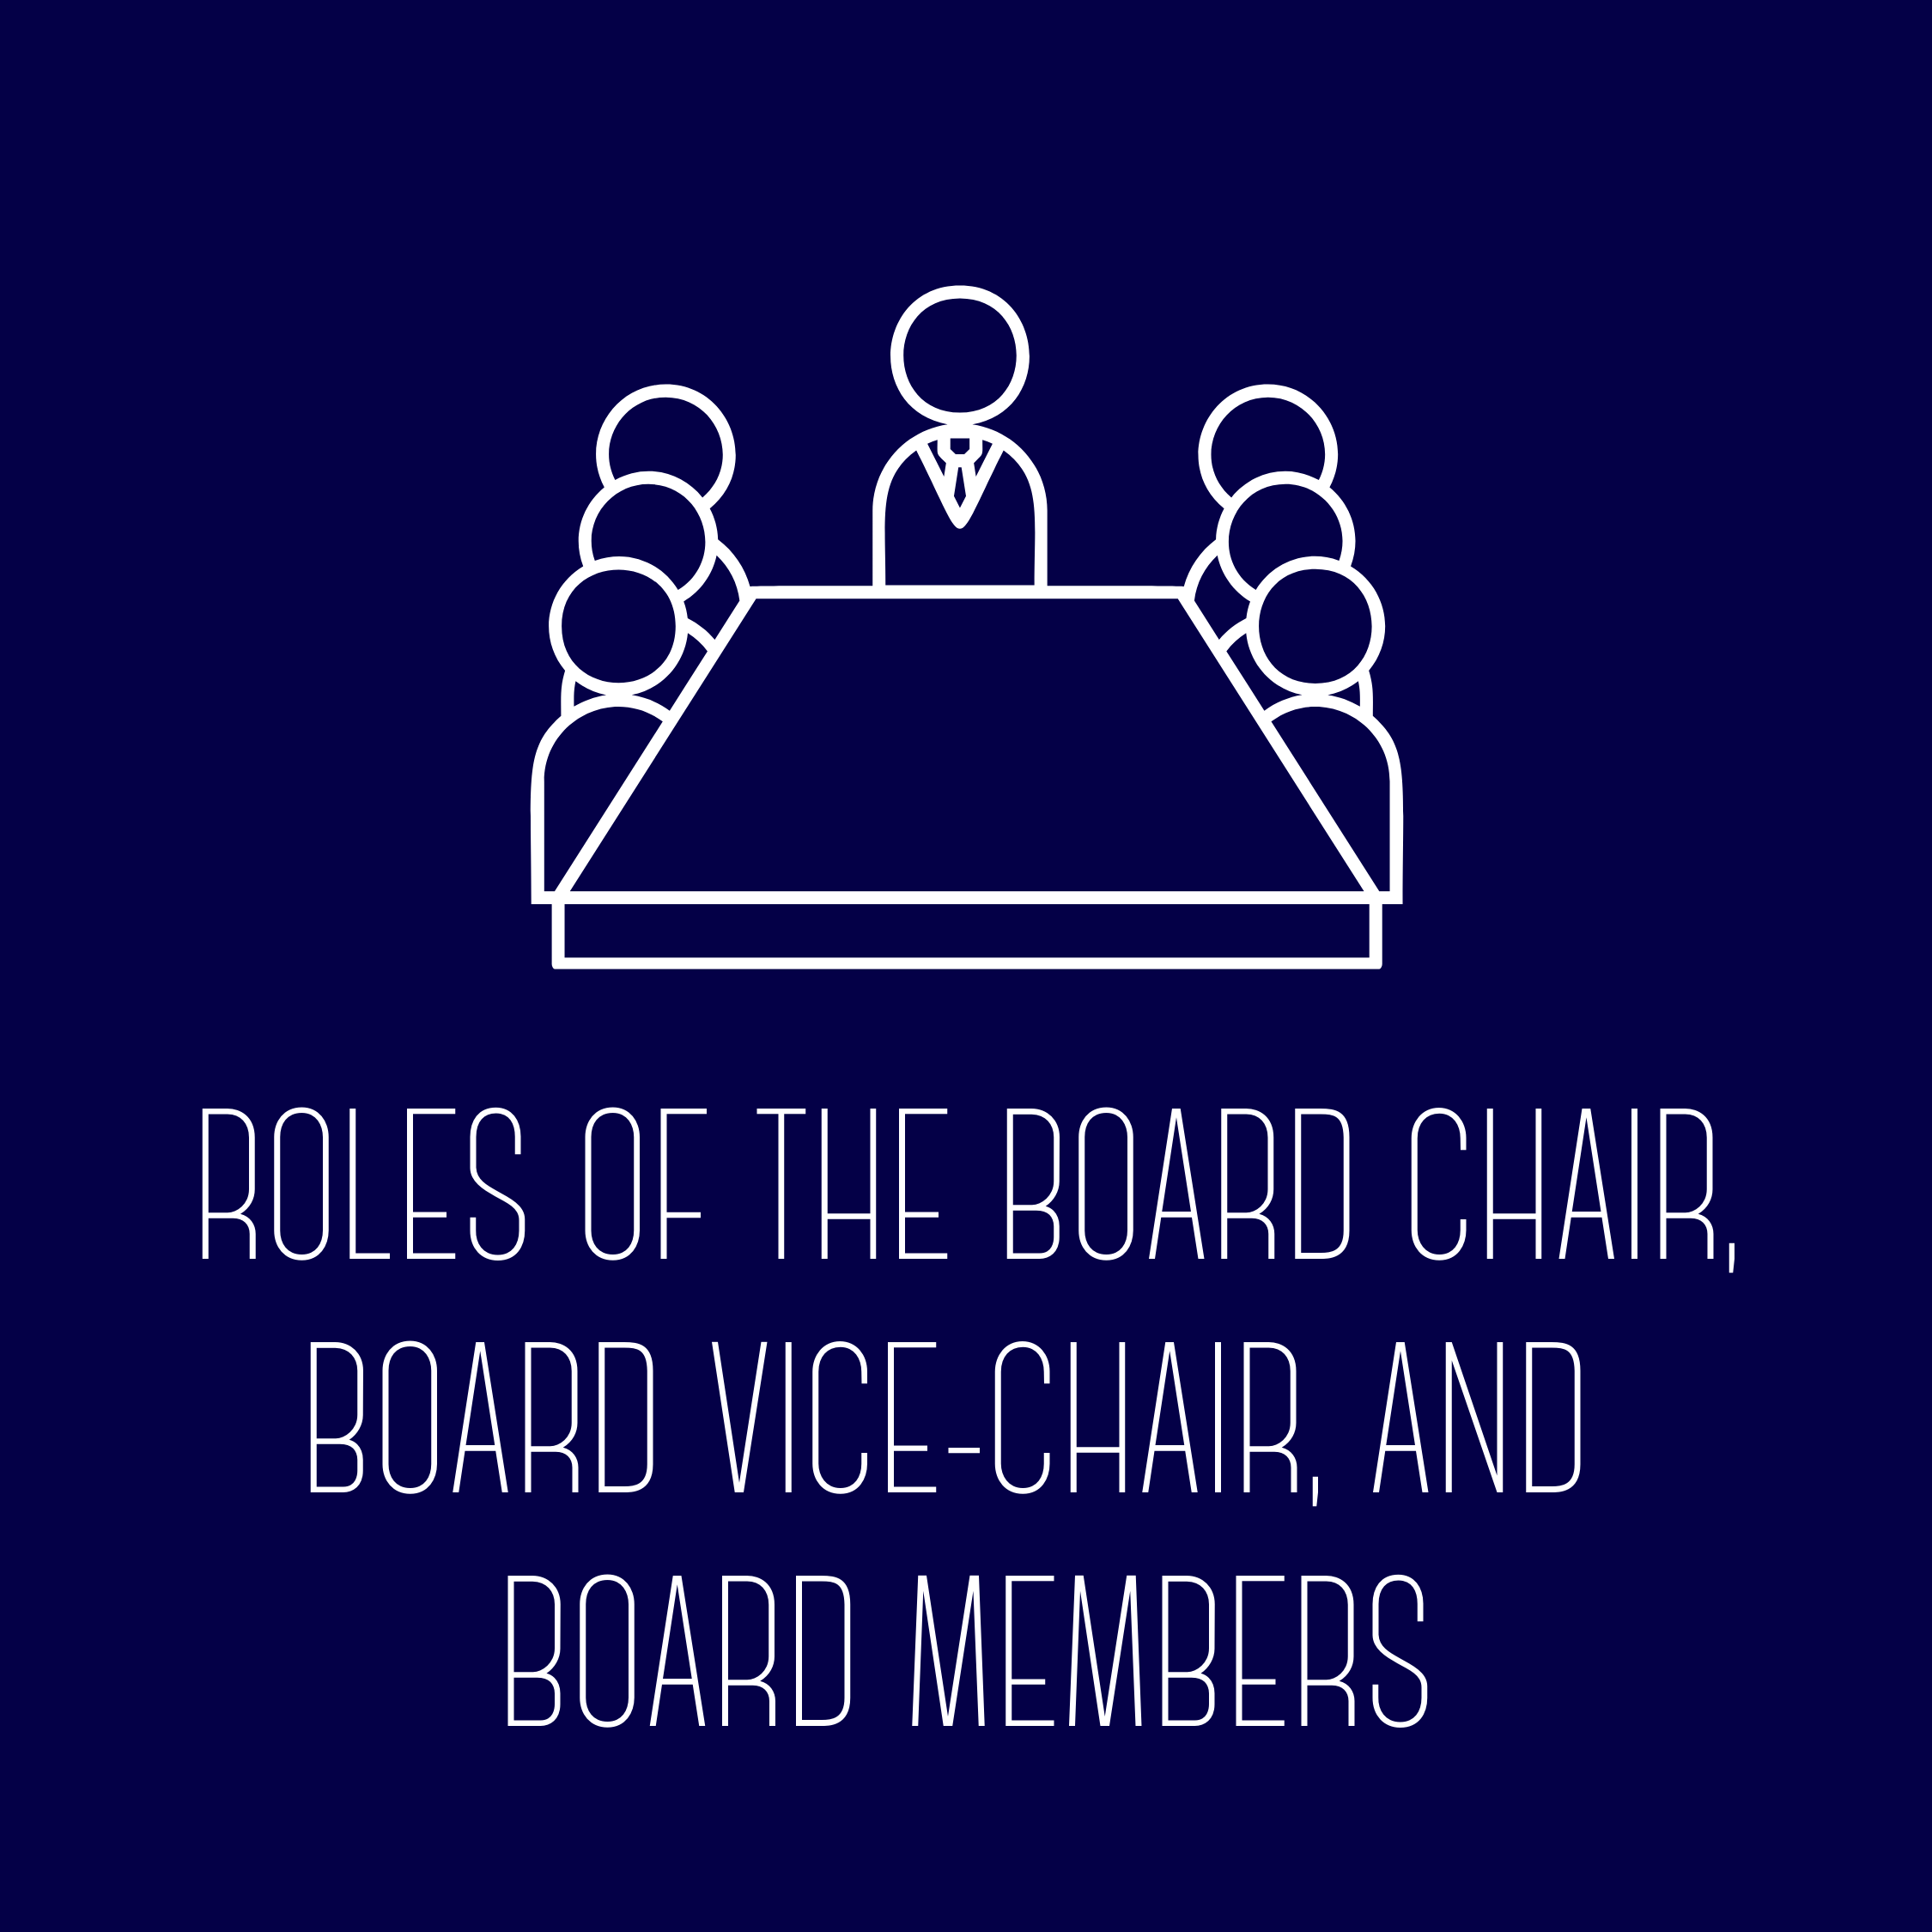 Role of the Board Chair, Board Vice-Chair, and Board Members